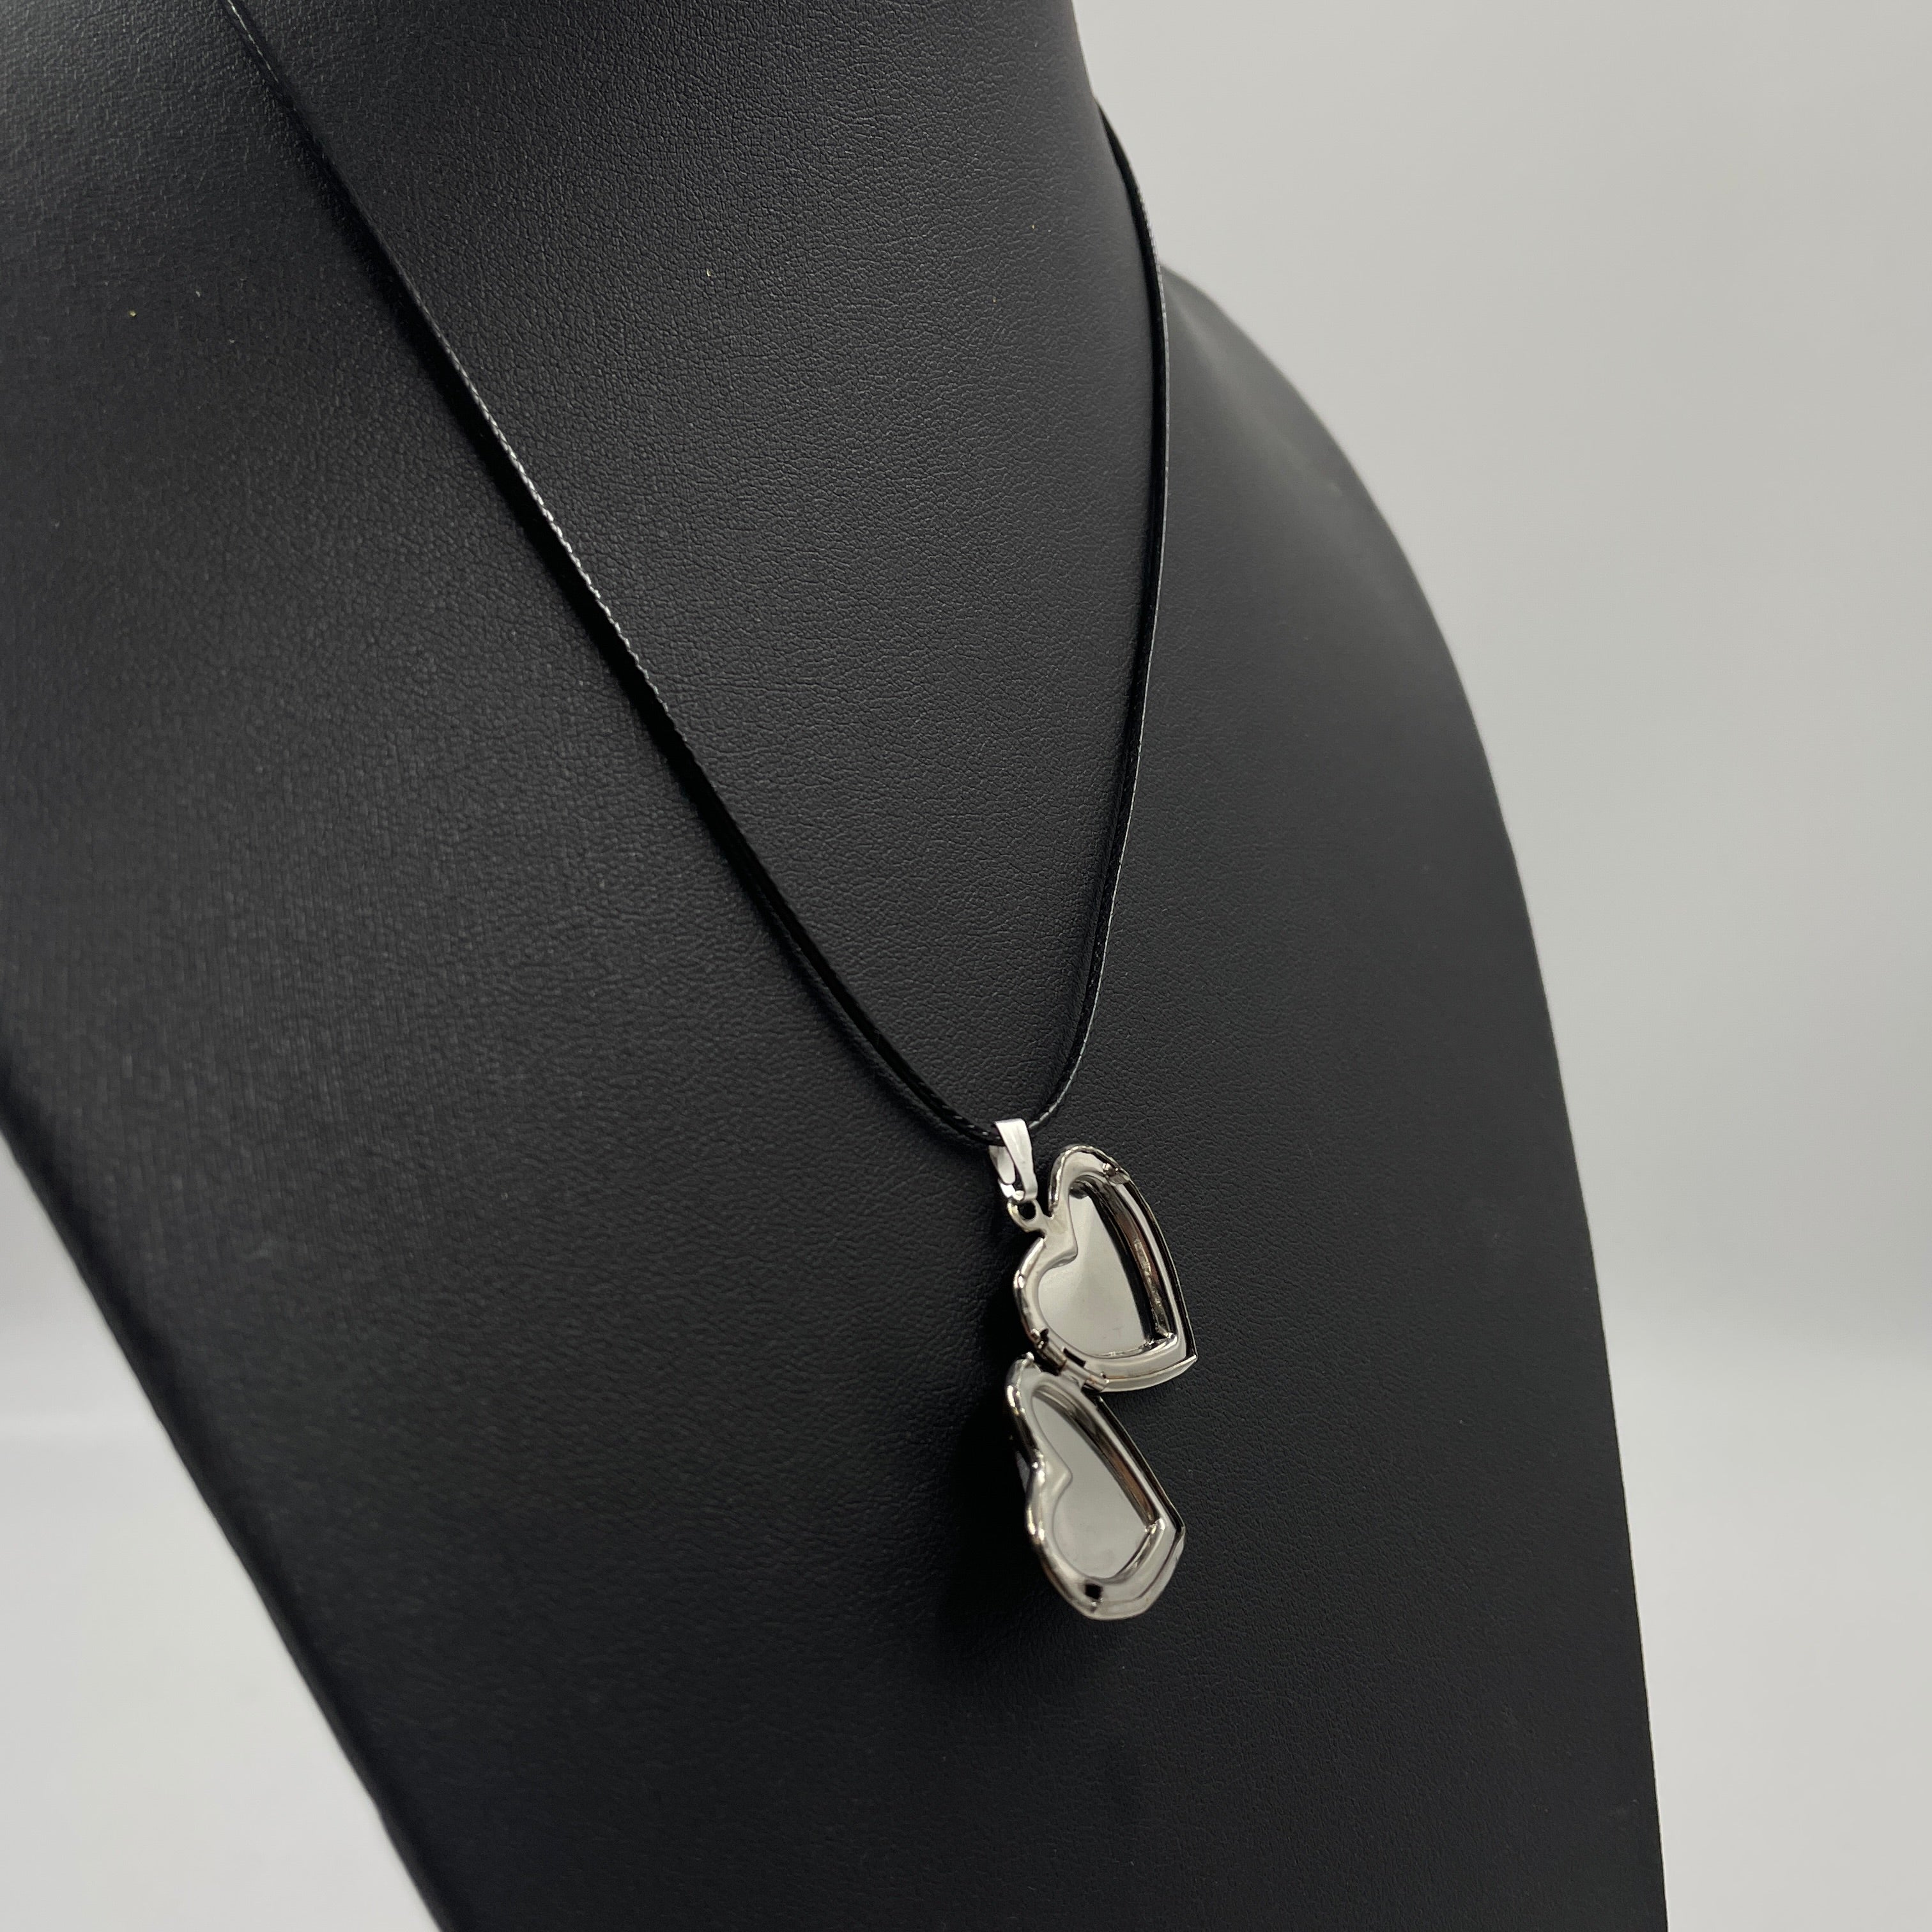 Pendant on the neck with a heart